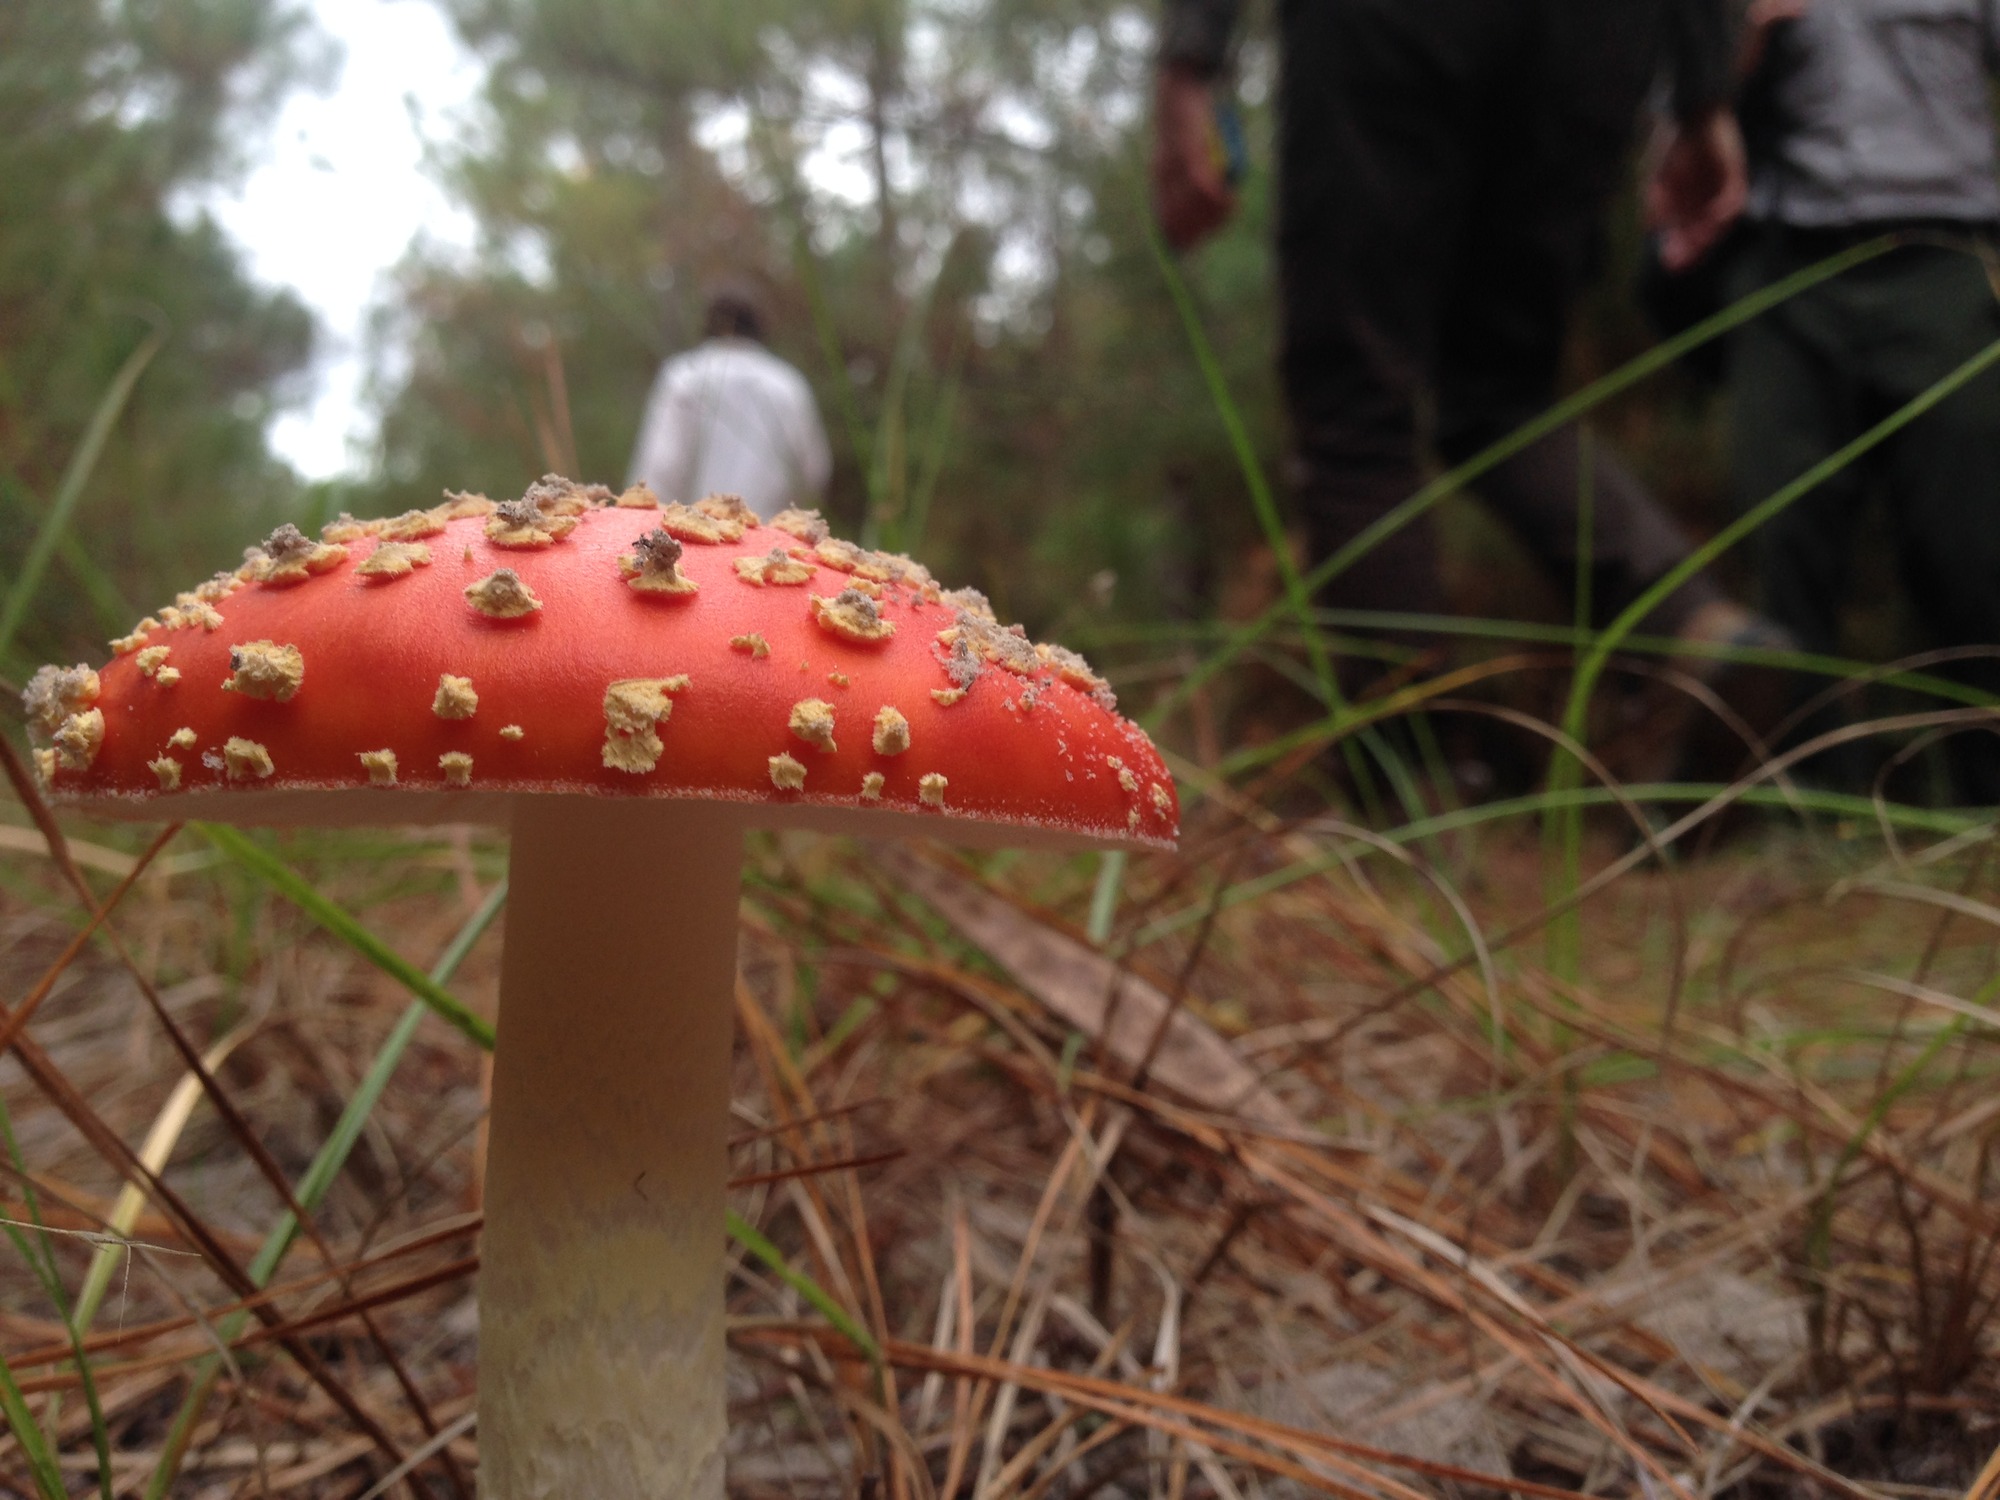 A red-capped mushroom with numerous white crusty flakes on the cap and a white stem